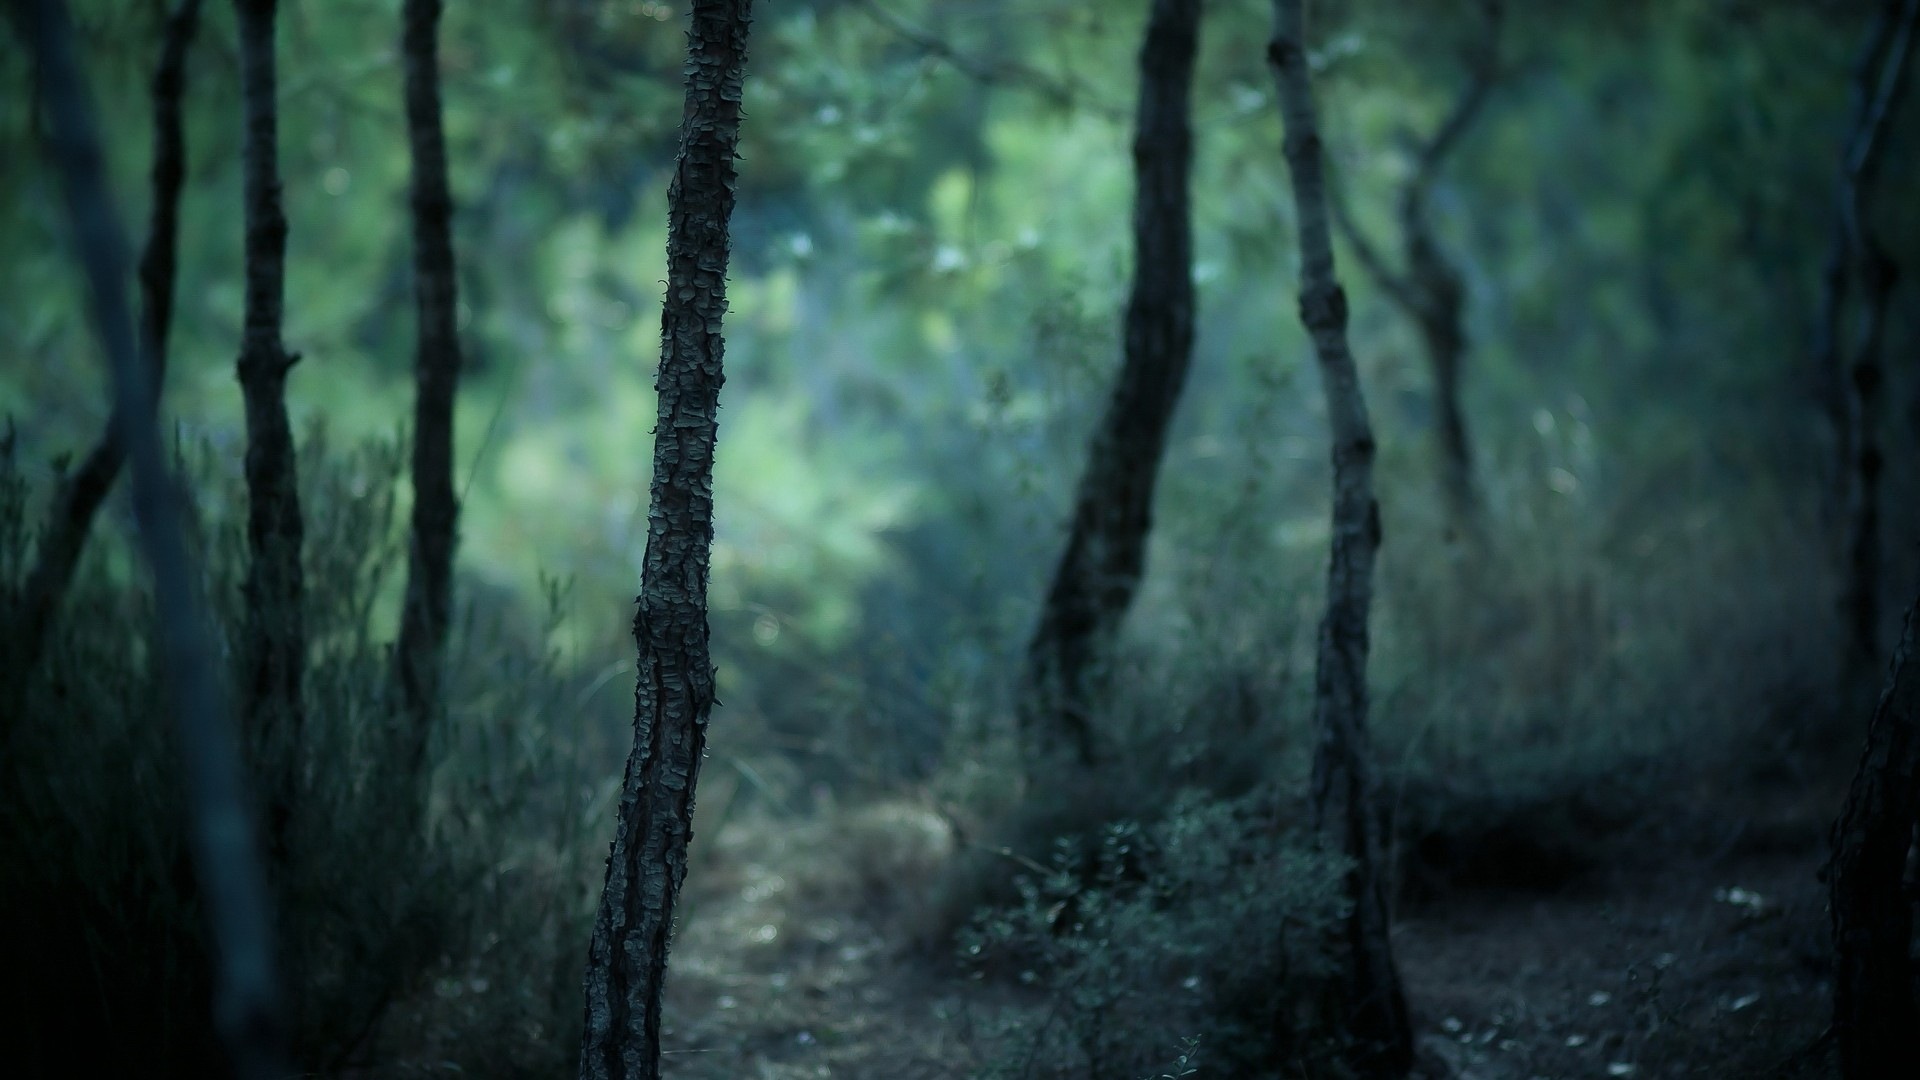 Windows 8 theme forest scenery HD wallpapers #7 - 1920x1080